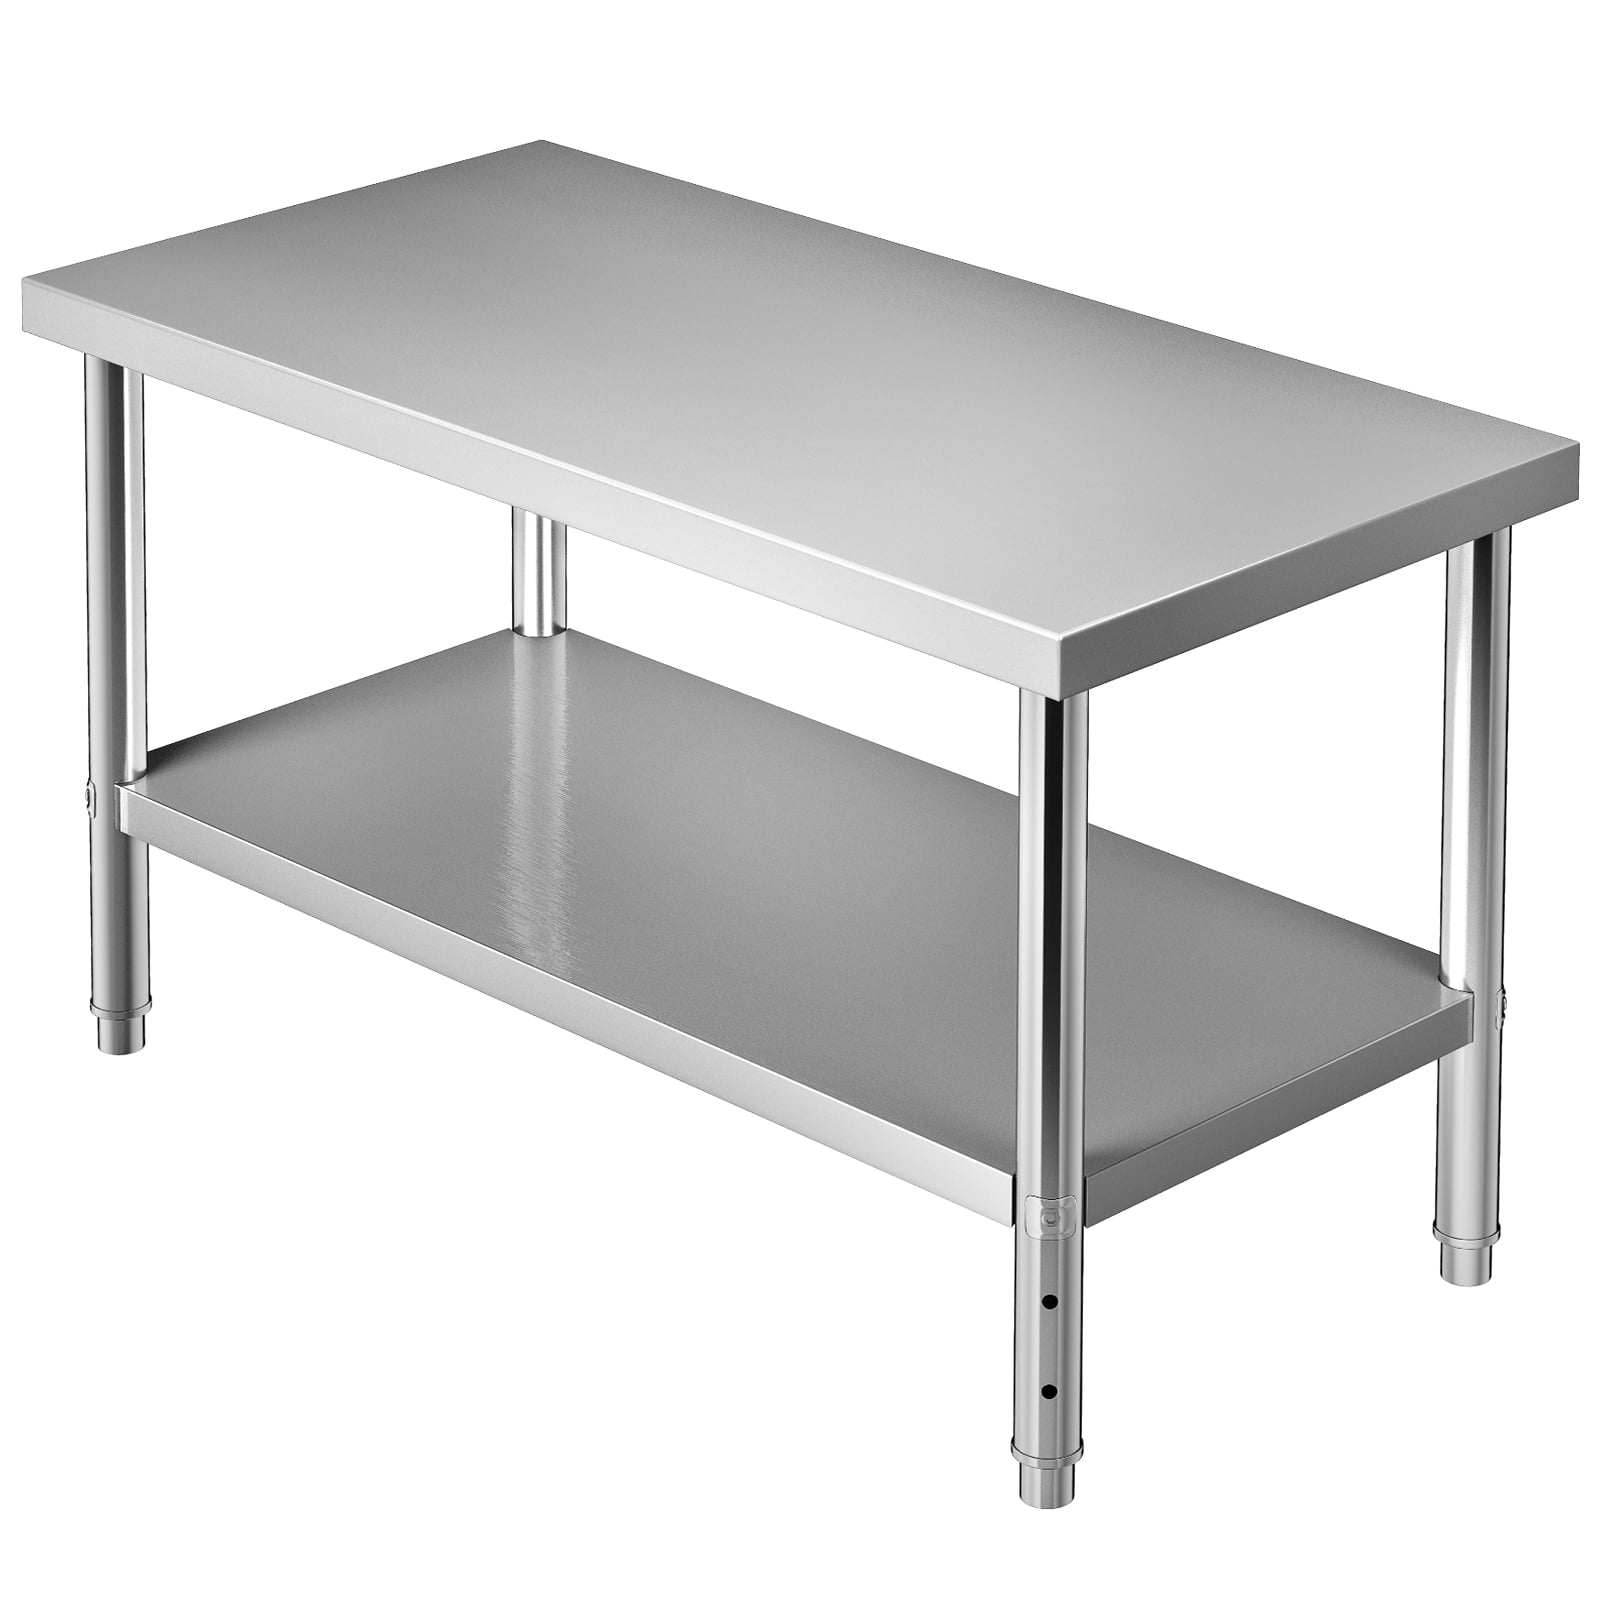 Kitchen Work Table Stainless Steel Work Table，60x24 Inches Commercial Work Table，Food Metal Table Heavy Duty Prep Table NSF Workstations for Garage Restaurant Kitchen with Adjustable Shelf,Silver 